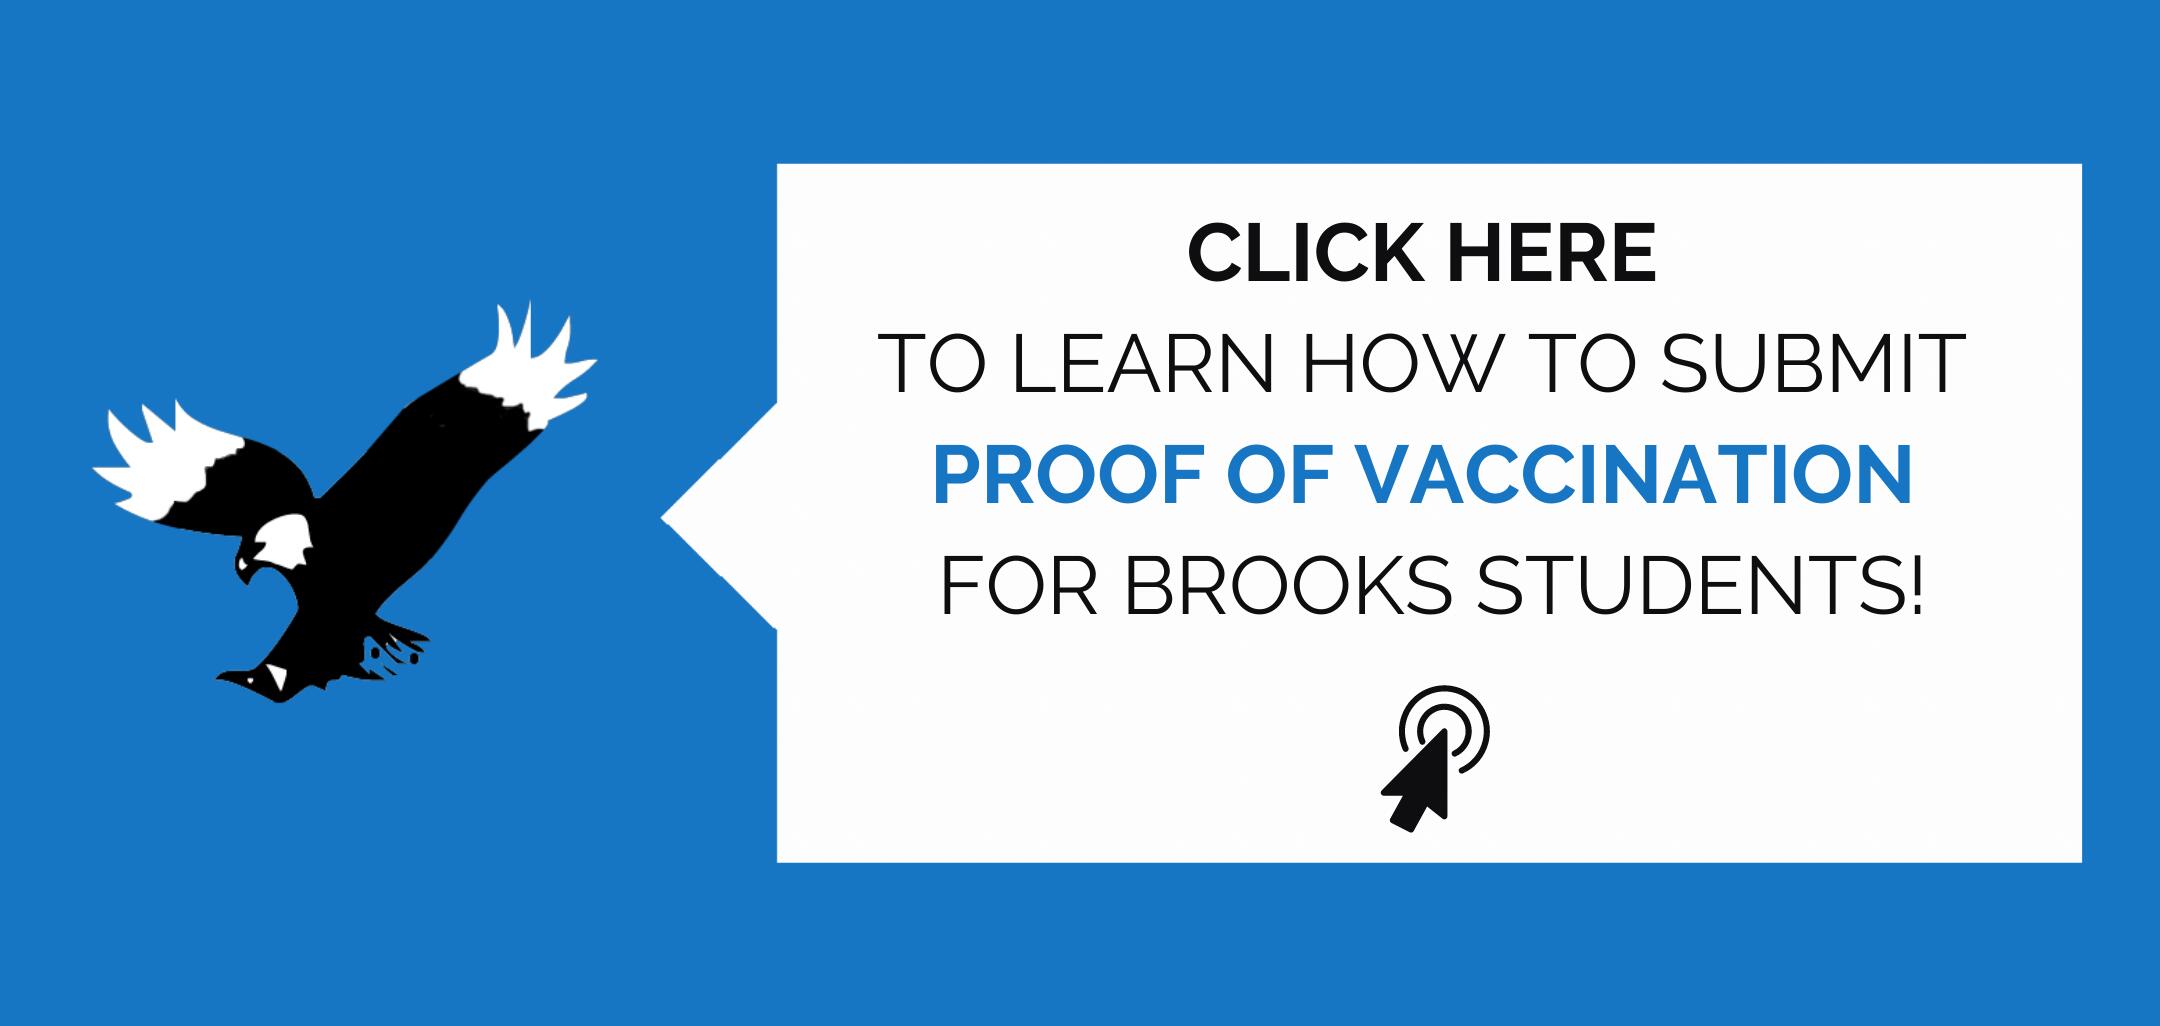 Click here to learn how to submit proof of vaccination for Brooks students